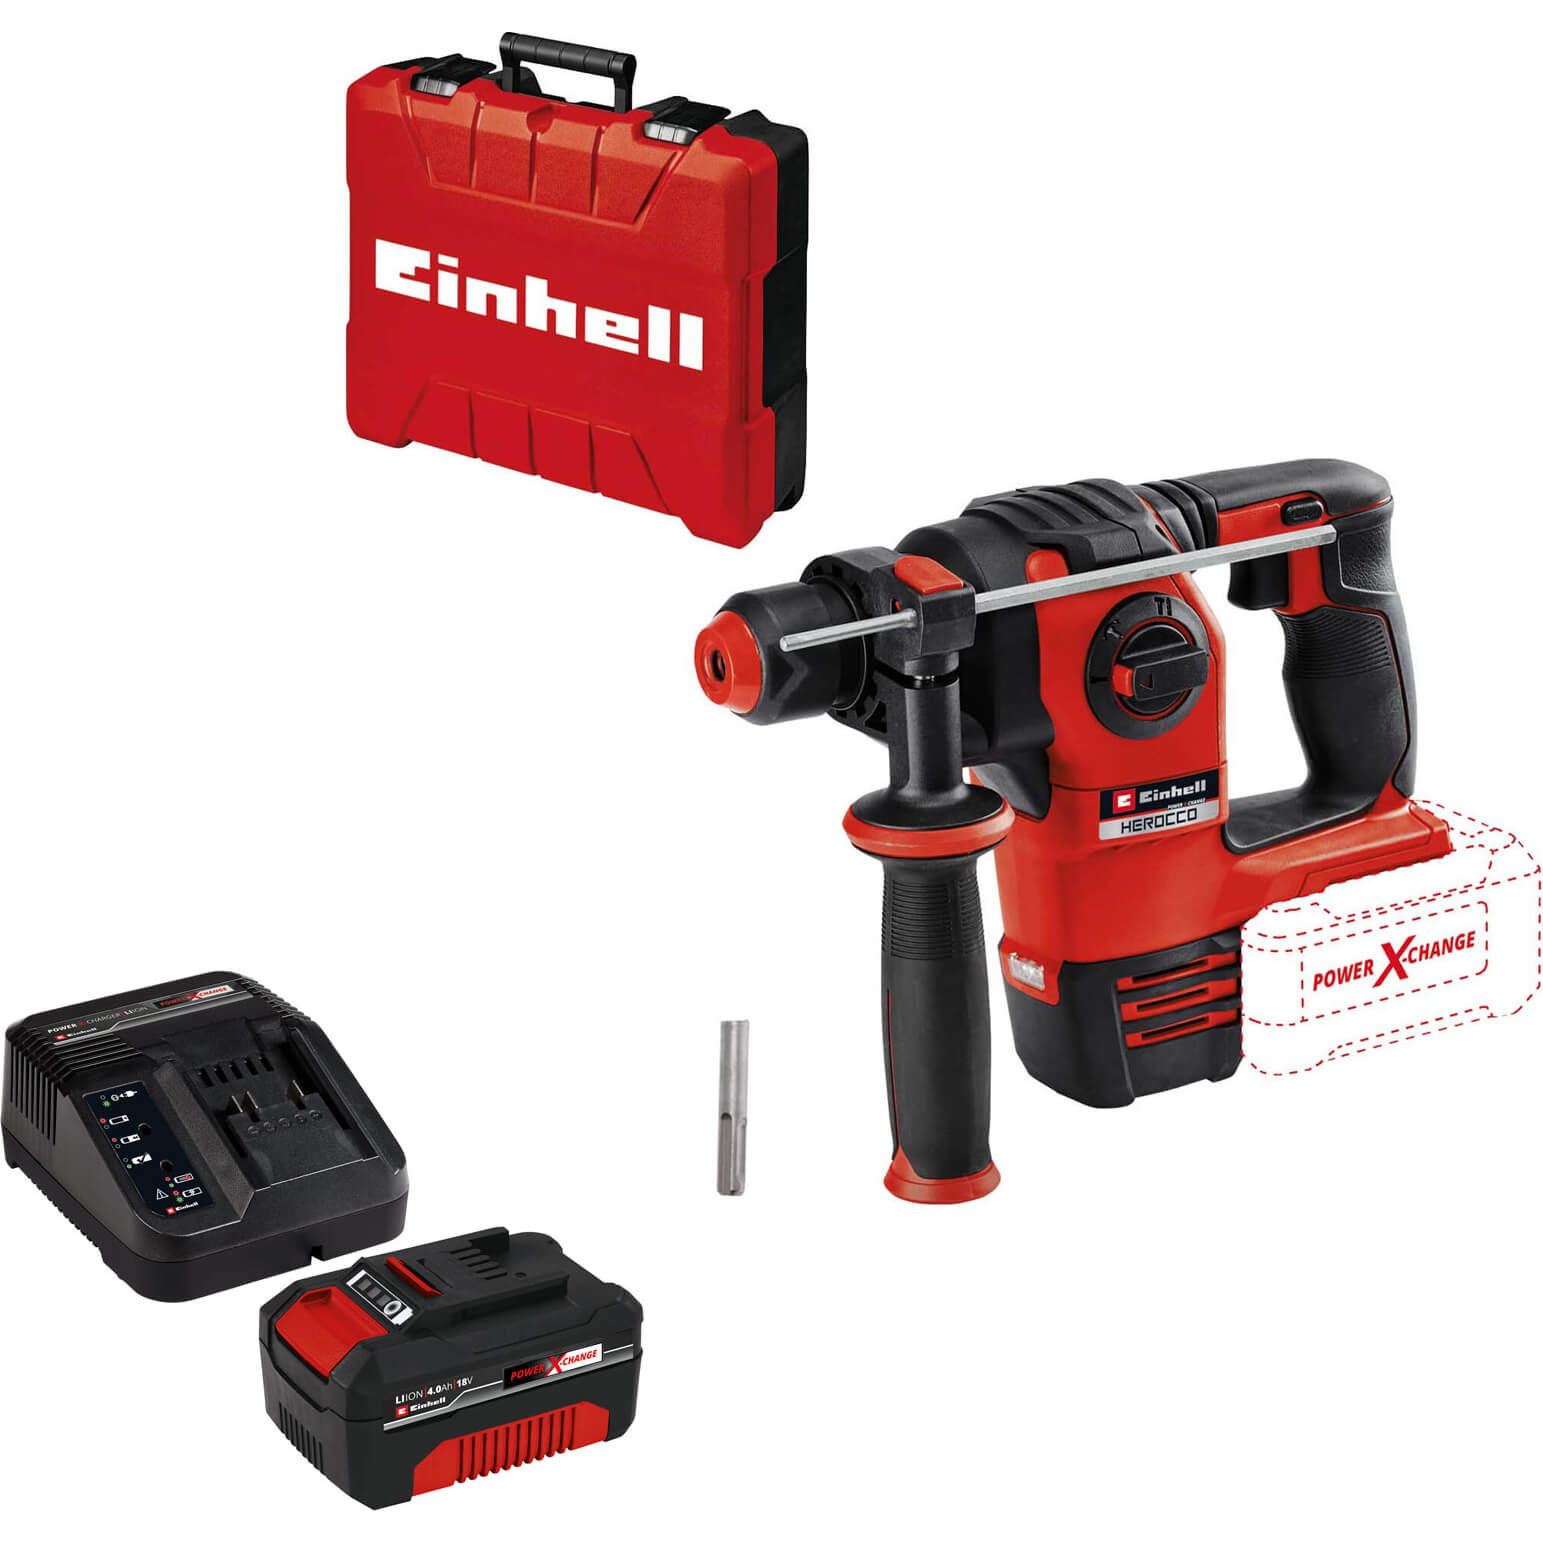 Einhell HEROCCO 18v Cordless Brushless SDS Plus Rotary Hammer Drill 1 x 4ah Li-ion Charger Case